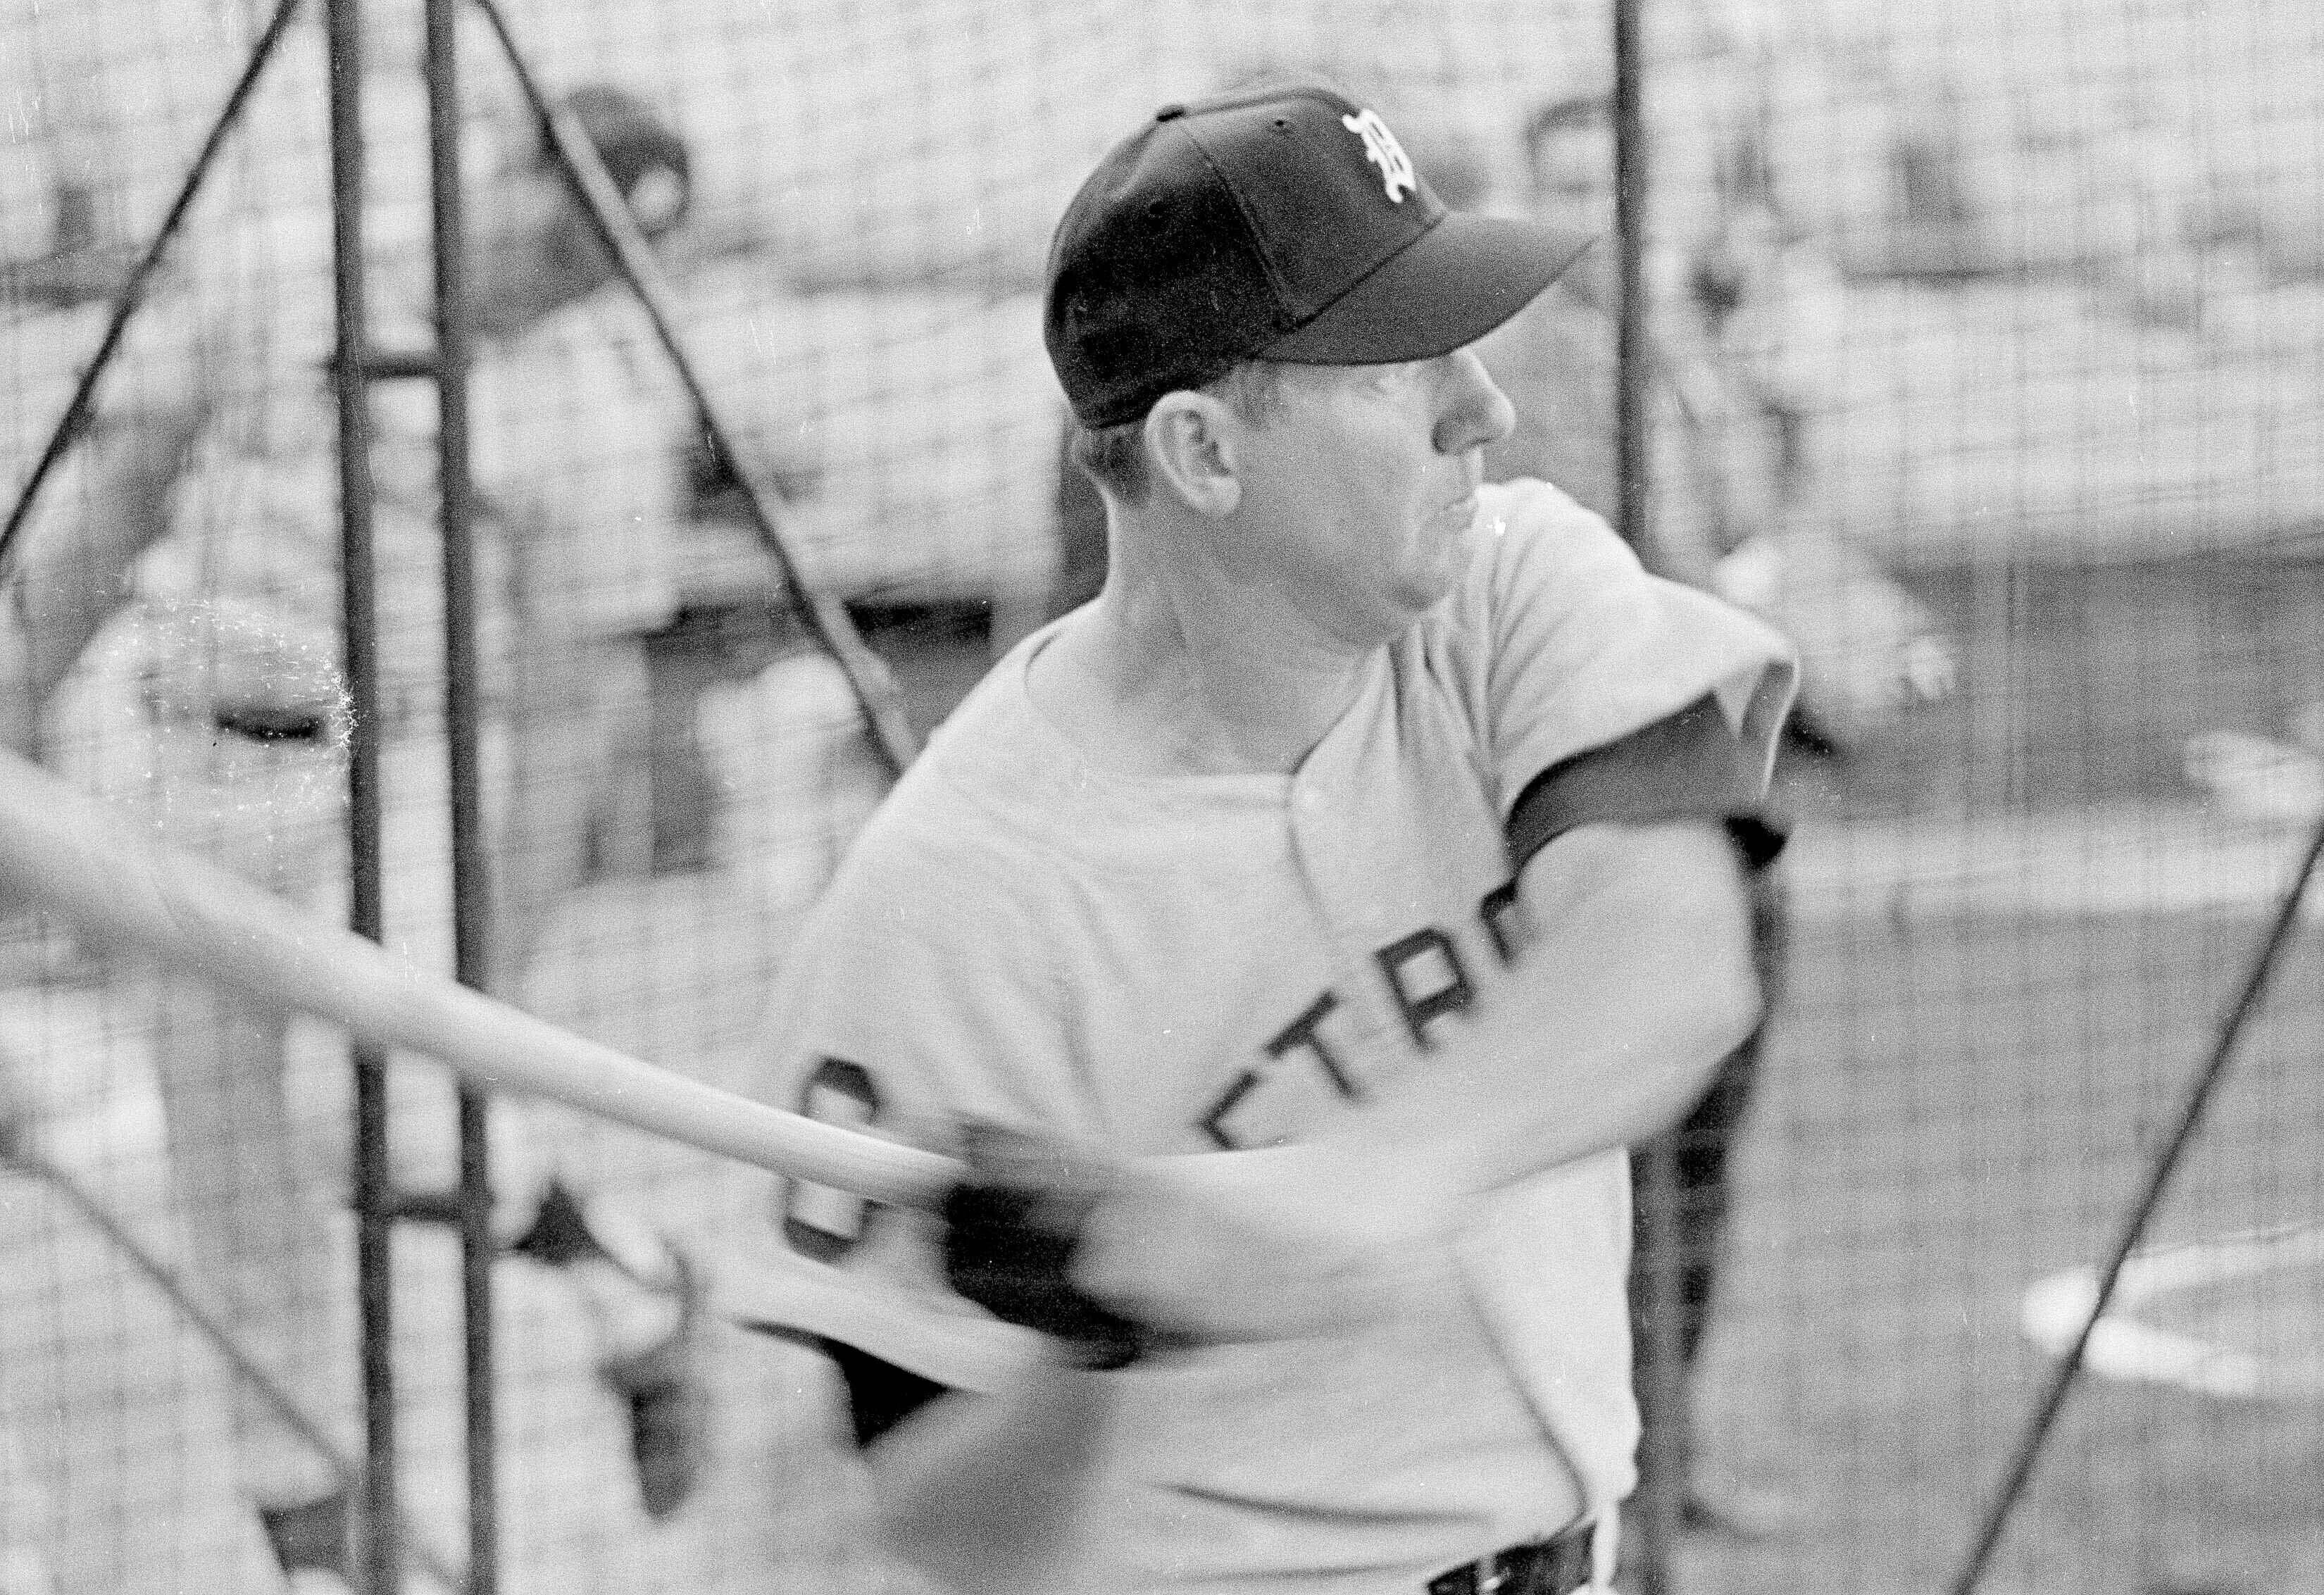 Al Kaline, the big power batter of Detroit, who has been out of the Tigers' lineup for about three weeks because of a broken finger, takes a fast cut at the ball in the batting cage before the game against the White Sox in Chicago, July 28, 1967. He went into the lineup, but was 0-5 for the night at the plate. However, Detroit beat the league-leaders, 7-4.